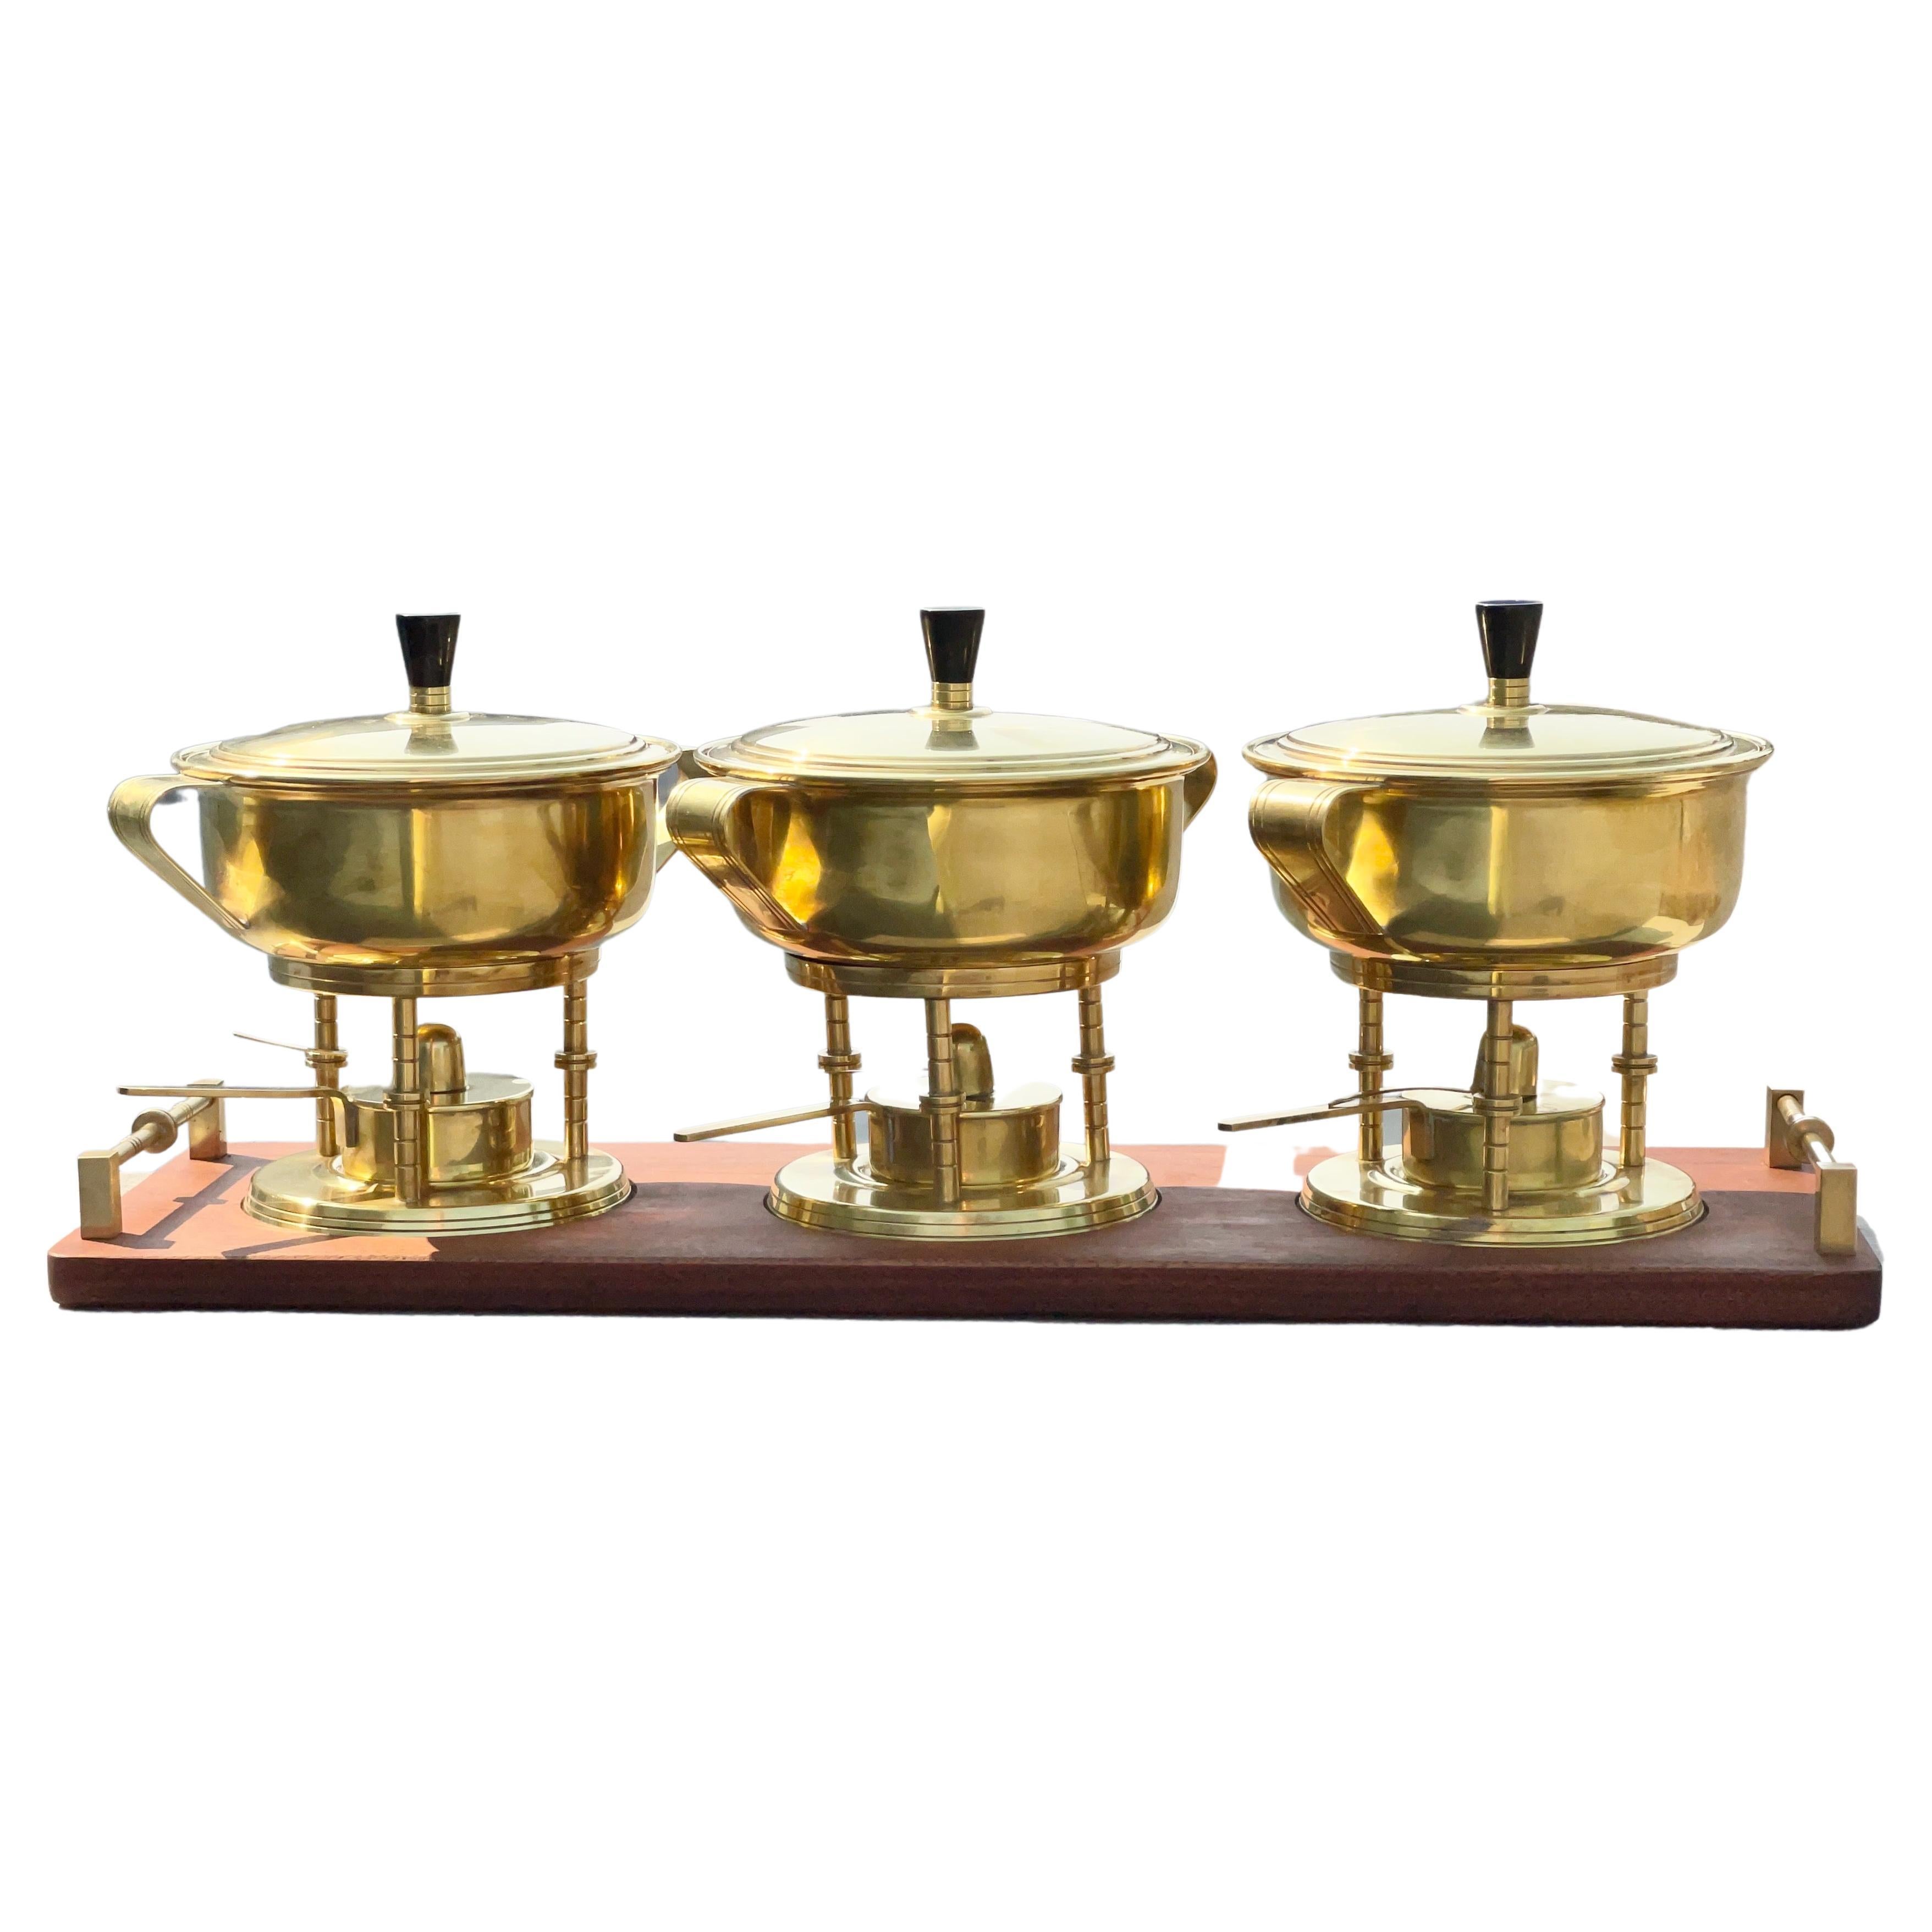 Tommi Parzinger designed set of three lidded solid brass chafing dishes (including Pyrex glass inner bowls) on food warmer stands with handled vessels for fuel oil and cotton wick together with snuffer. Bakelite handles on lids. All standing in a